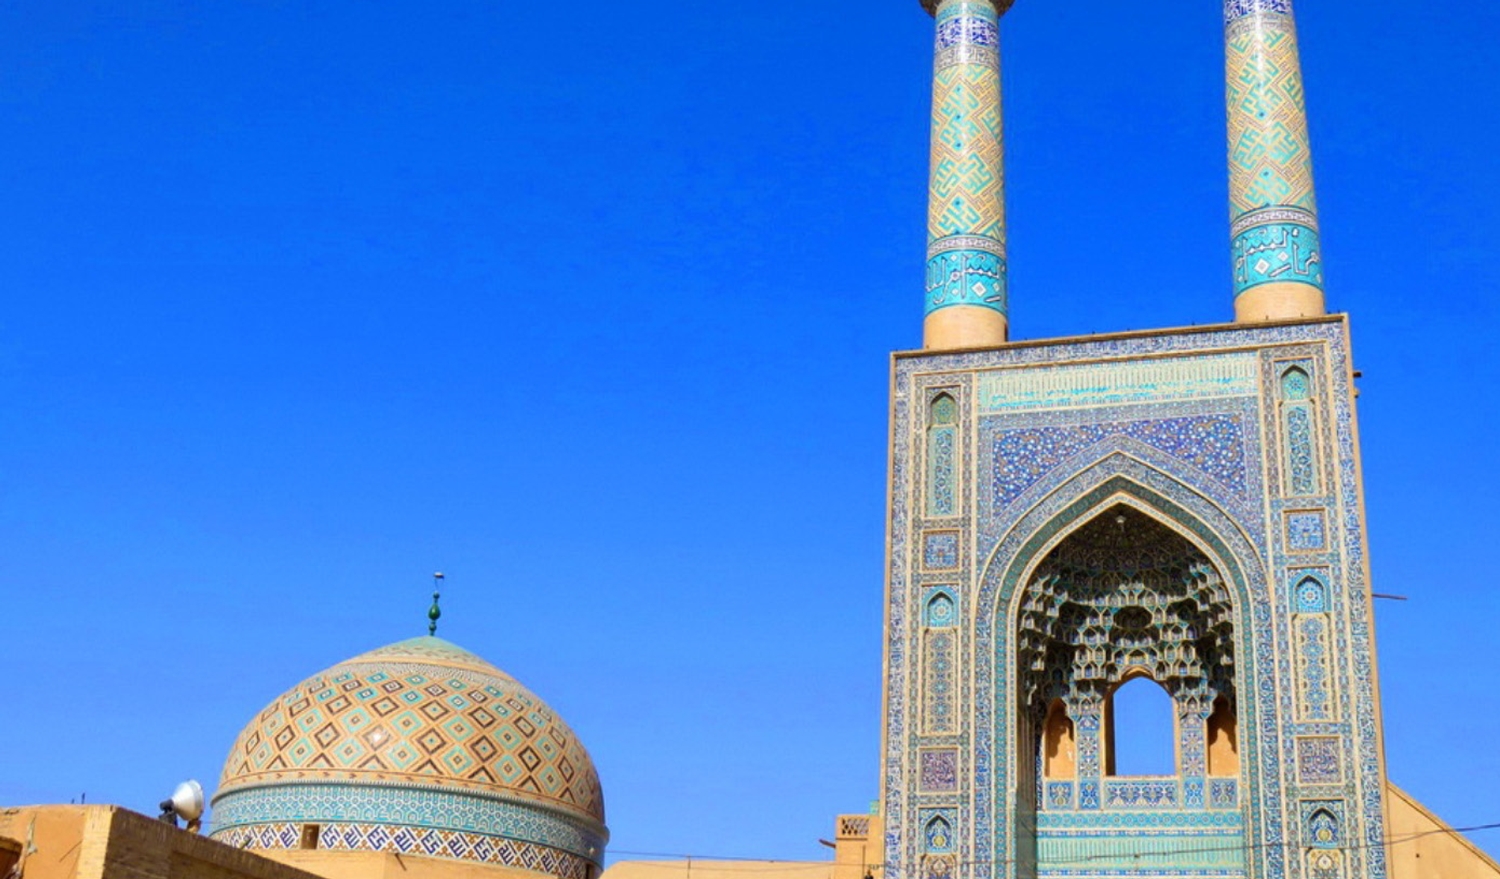 1-Week Travel Itinerary to the North-east of Iran